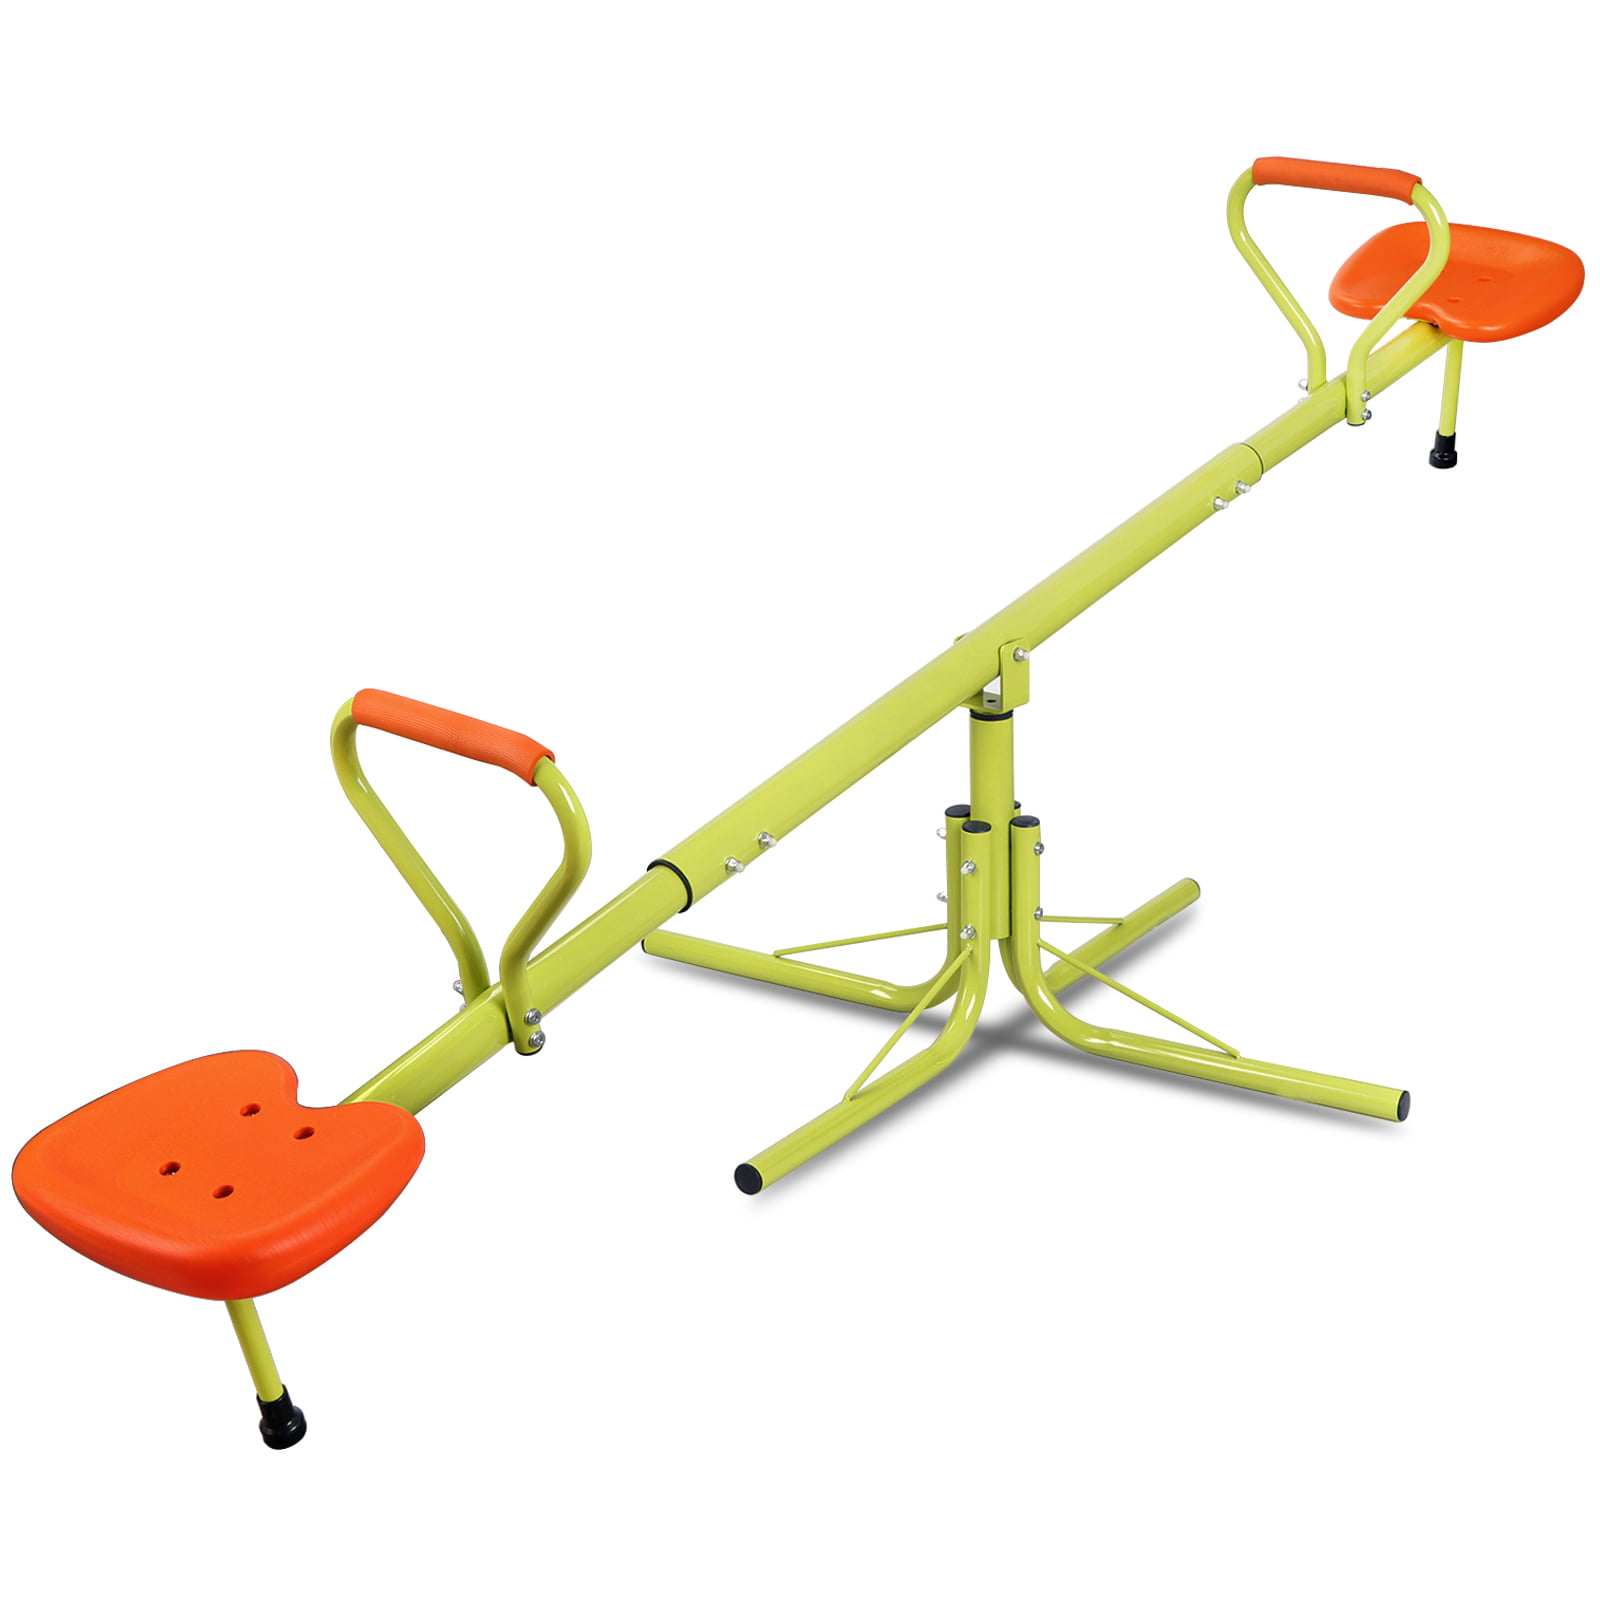 Stopper Pole Comfortable Seat & Handle Green Costzon Kids Seesaw Swivel Backyard Teeter Totter Playground Equipment Outdoor with 360 Degree Rotation